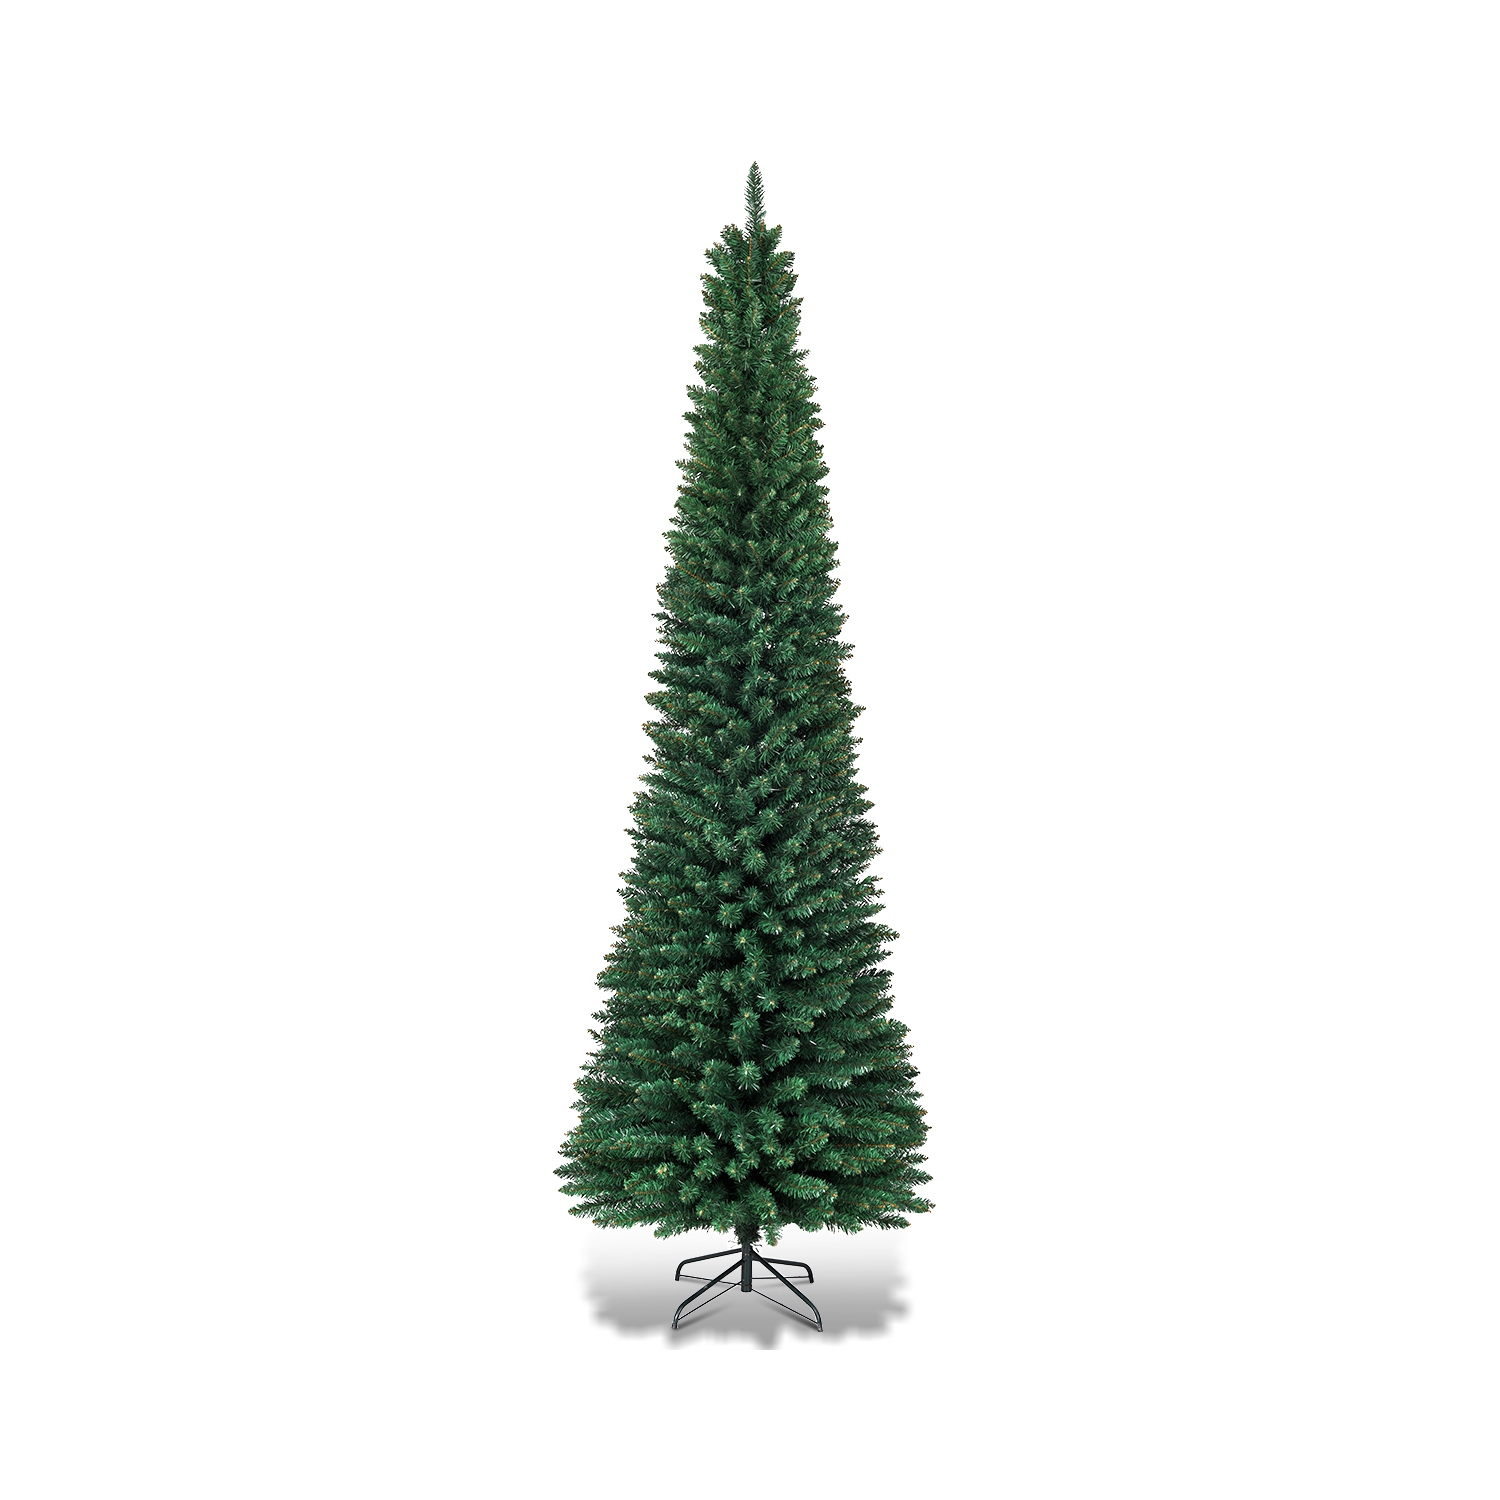 Costway 7Ft PVC Artificial Pencil Christmas Tree Slim w/ Stand Home Decor Green